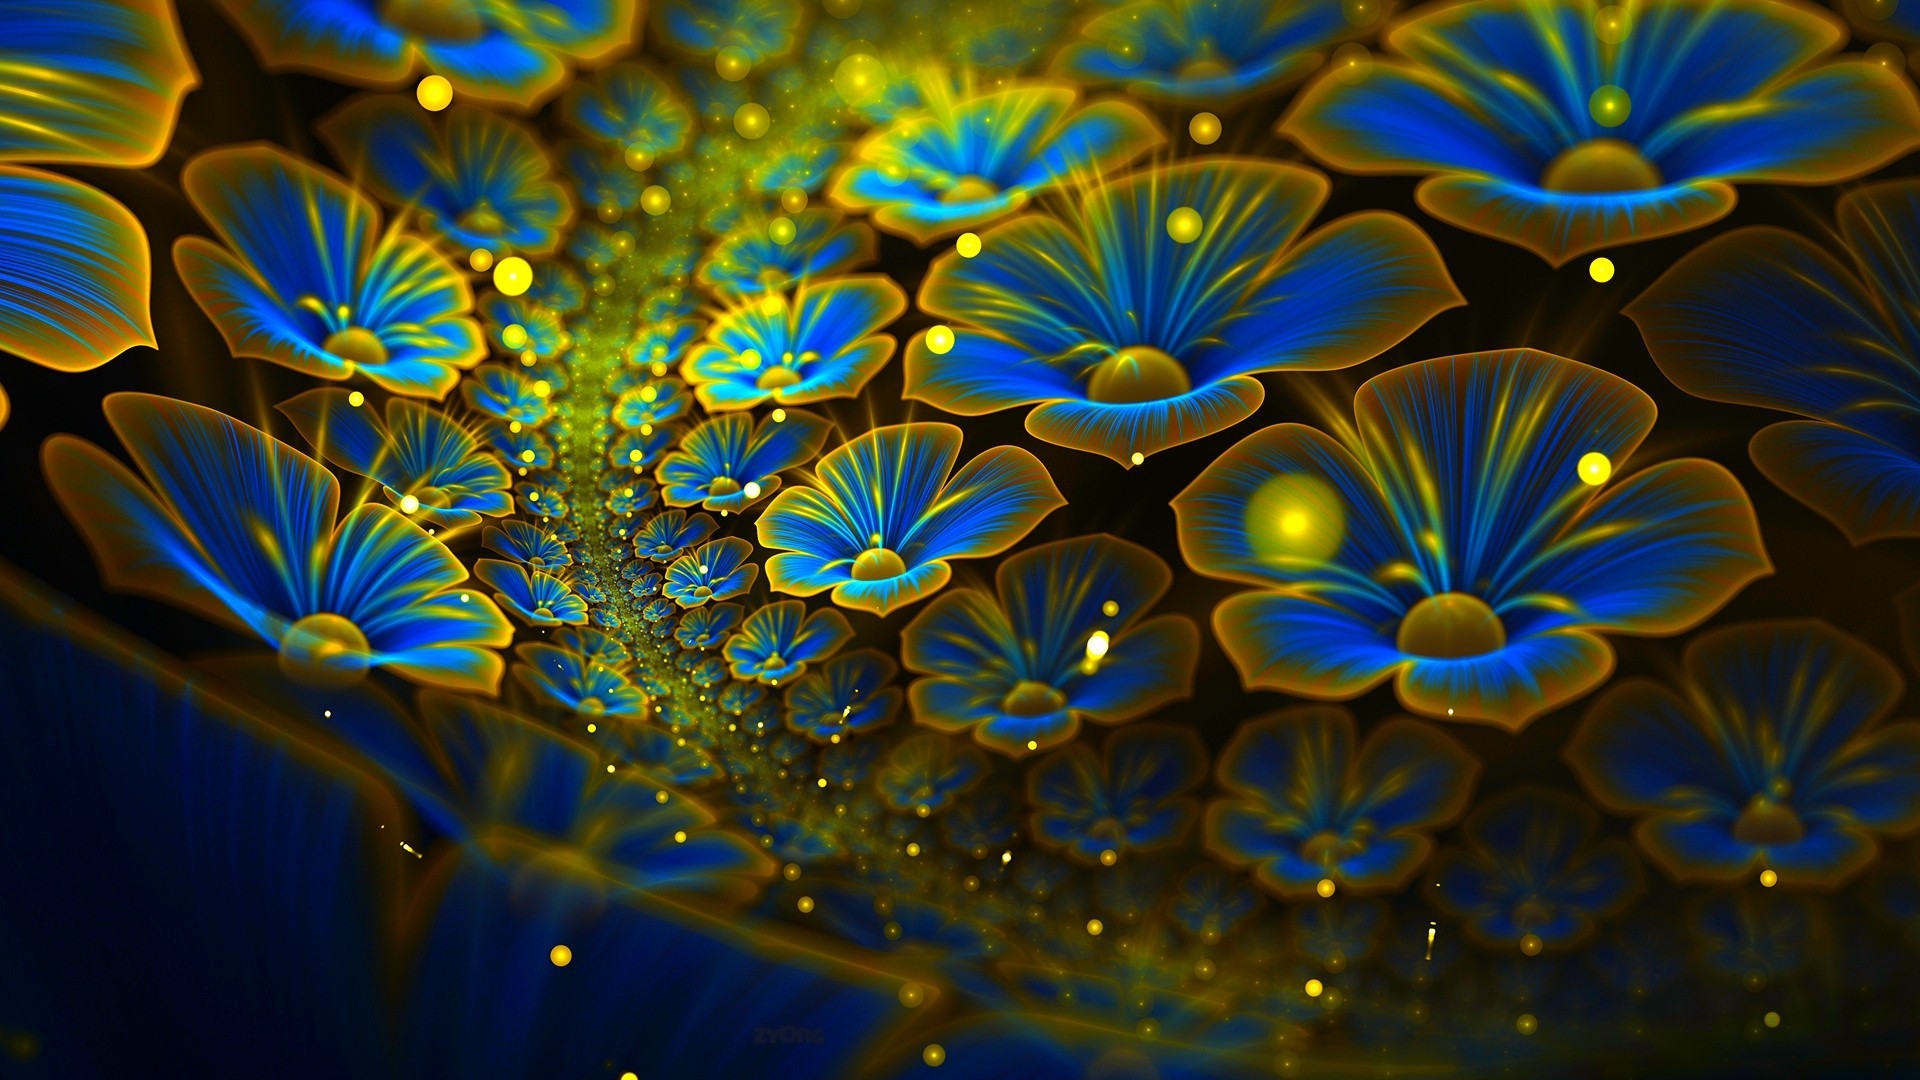 1920x1080  Abstract Anime Nature Wallpaper 1920 X 1080 #14189 Hd Wallpapers .